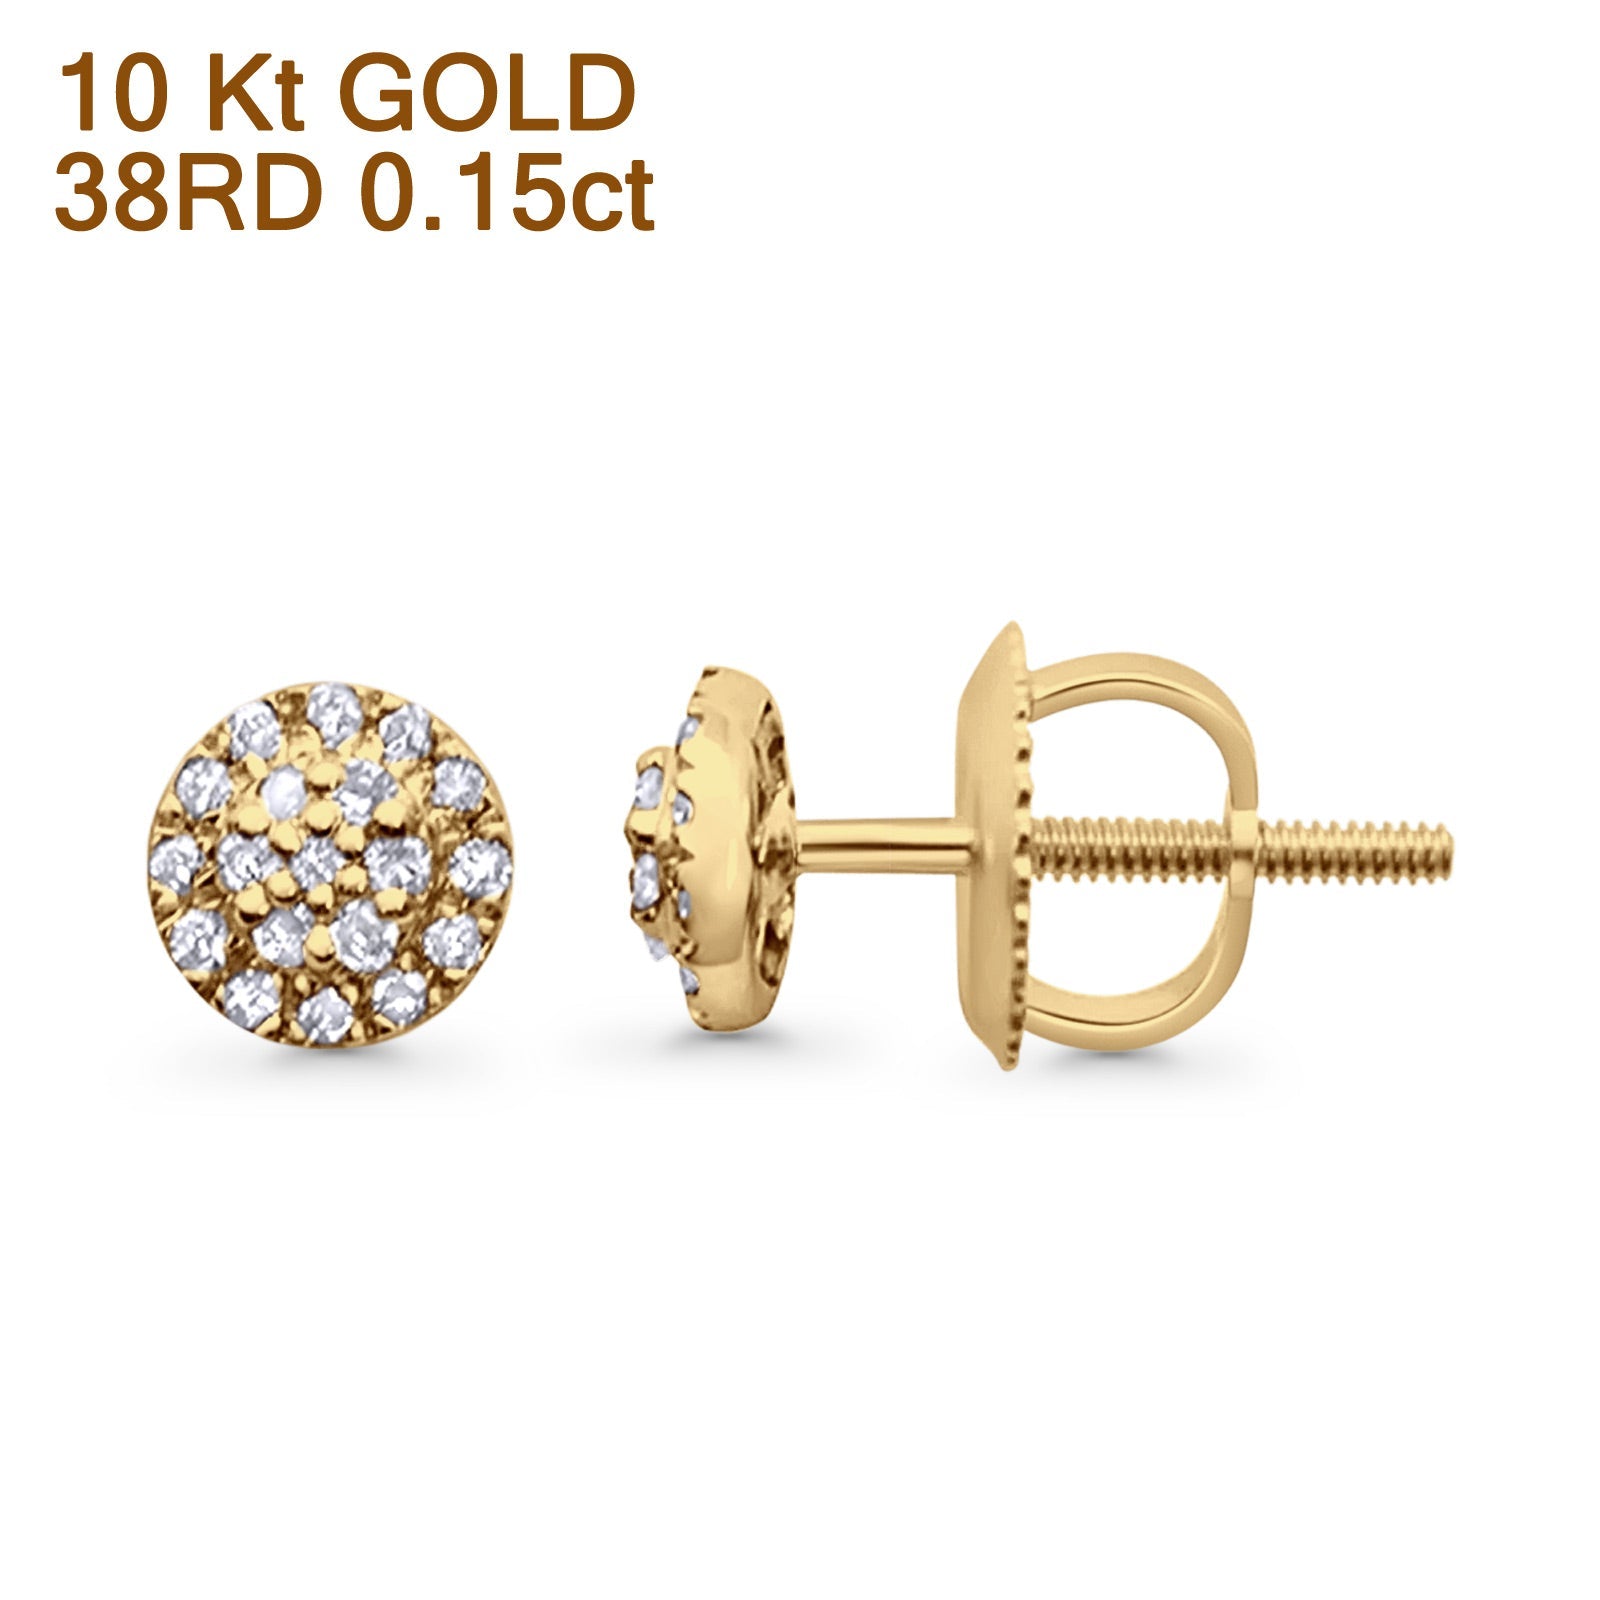 Solid 10K Gold 5.4mm Round Pave Setting Fashion Diamond Stud Earring